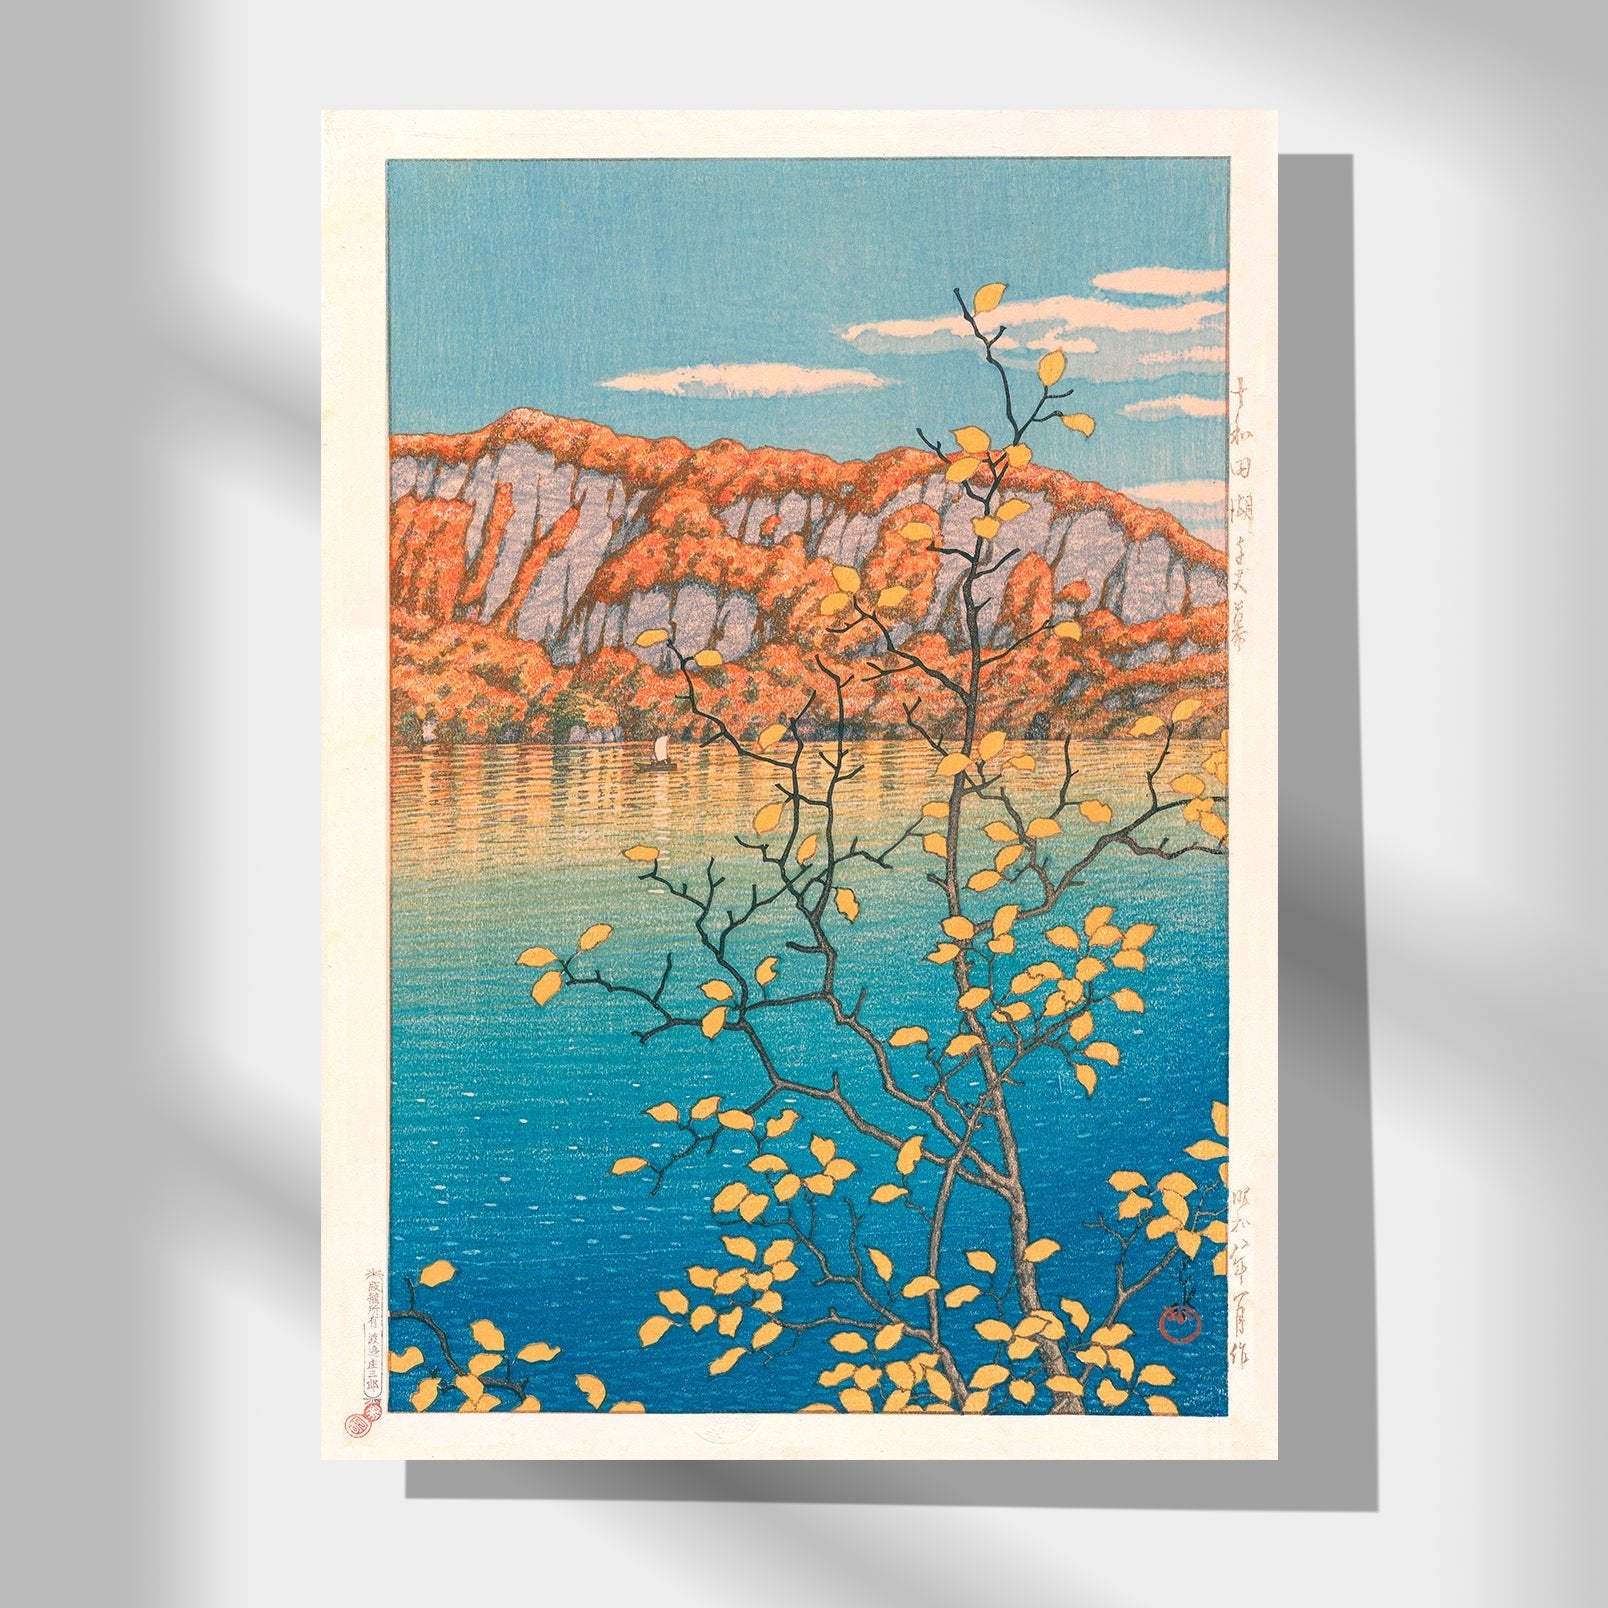 Mountain and lake with Autumn leaves in Japanese Art Poster by Kawase Hasui